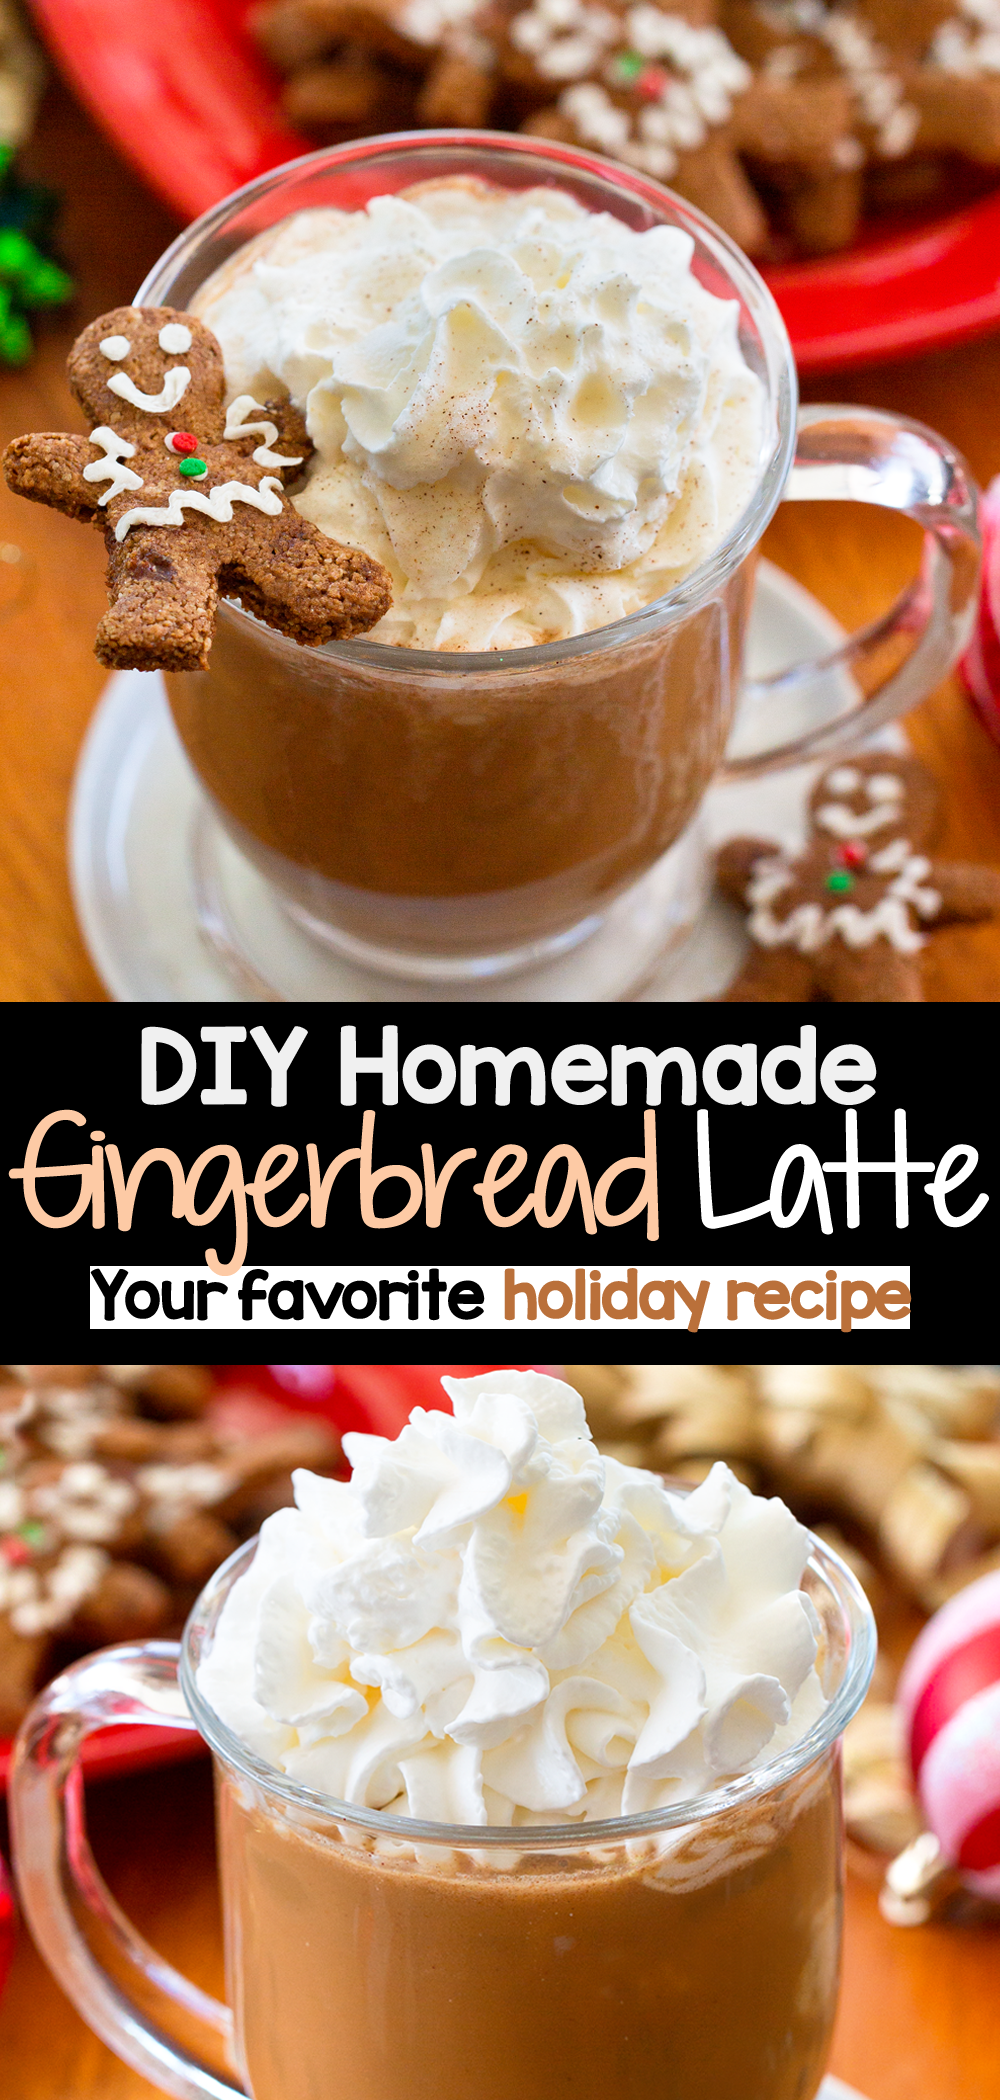 https://chocolatecoveredkatie.com/wp-content/uploads/2011/11/DIY-Gingerbread-Latte-Holiday-Drink-Recipe.png